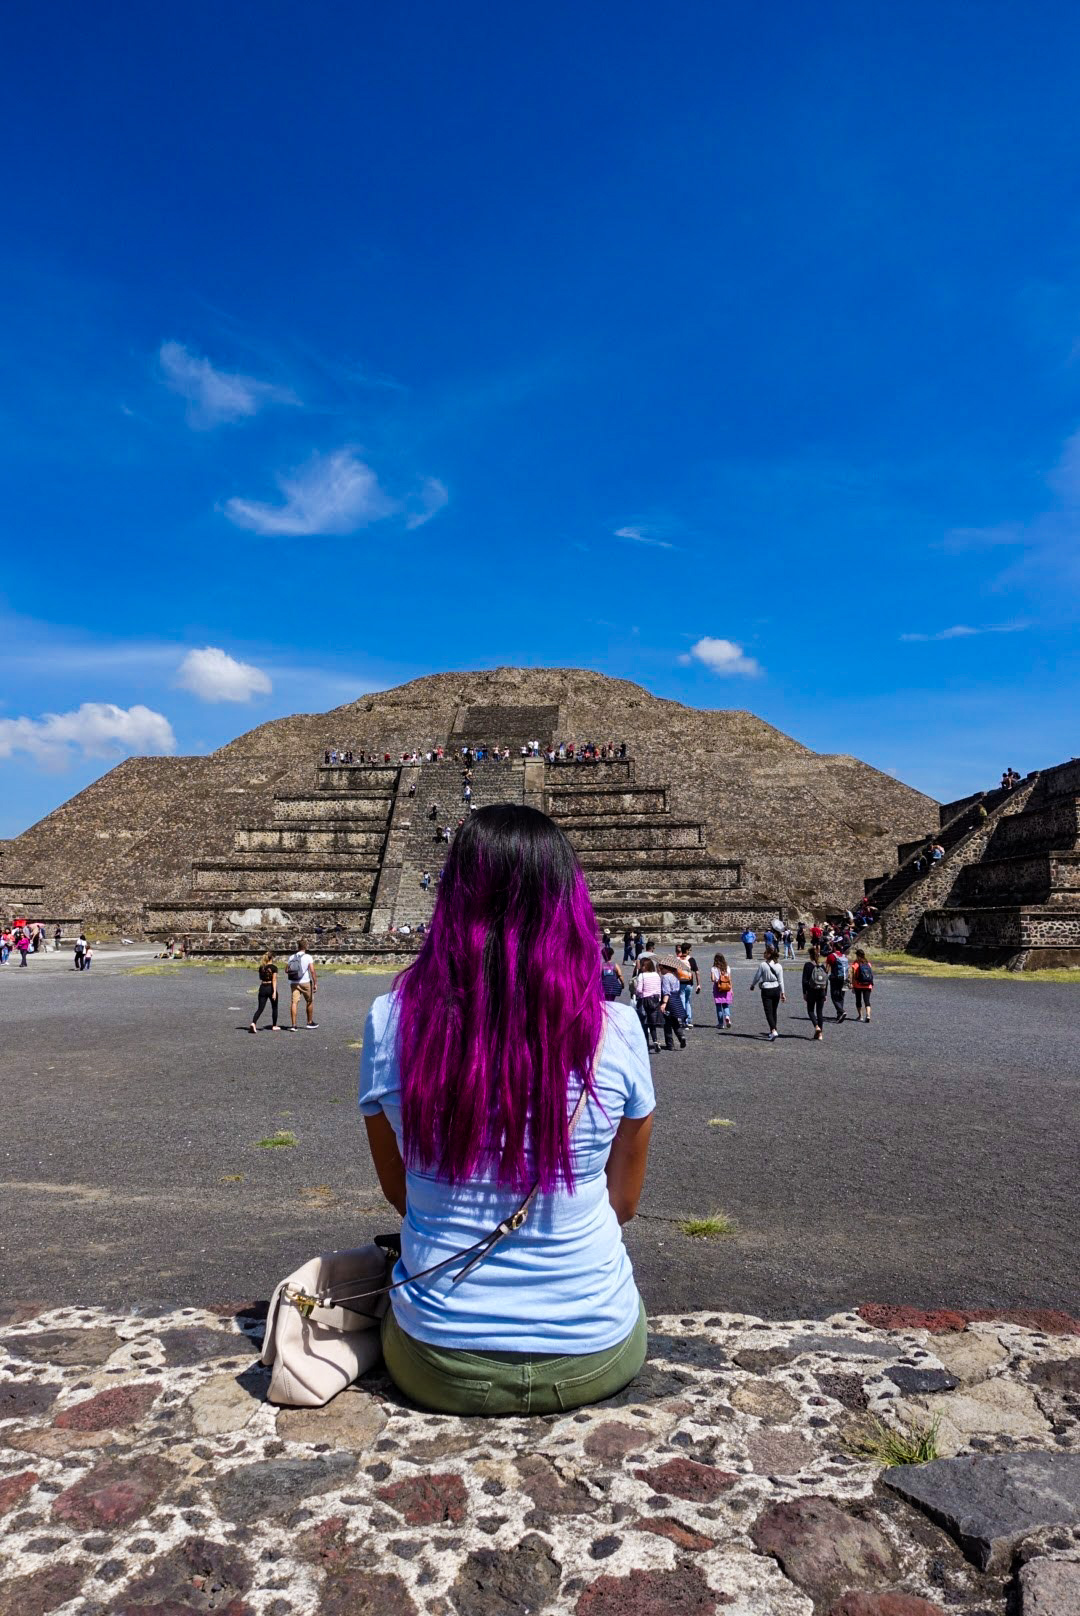 5 Day Trip Ideas from Mexico City - The Thrill of Pursuit